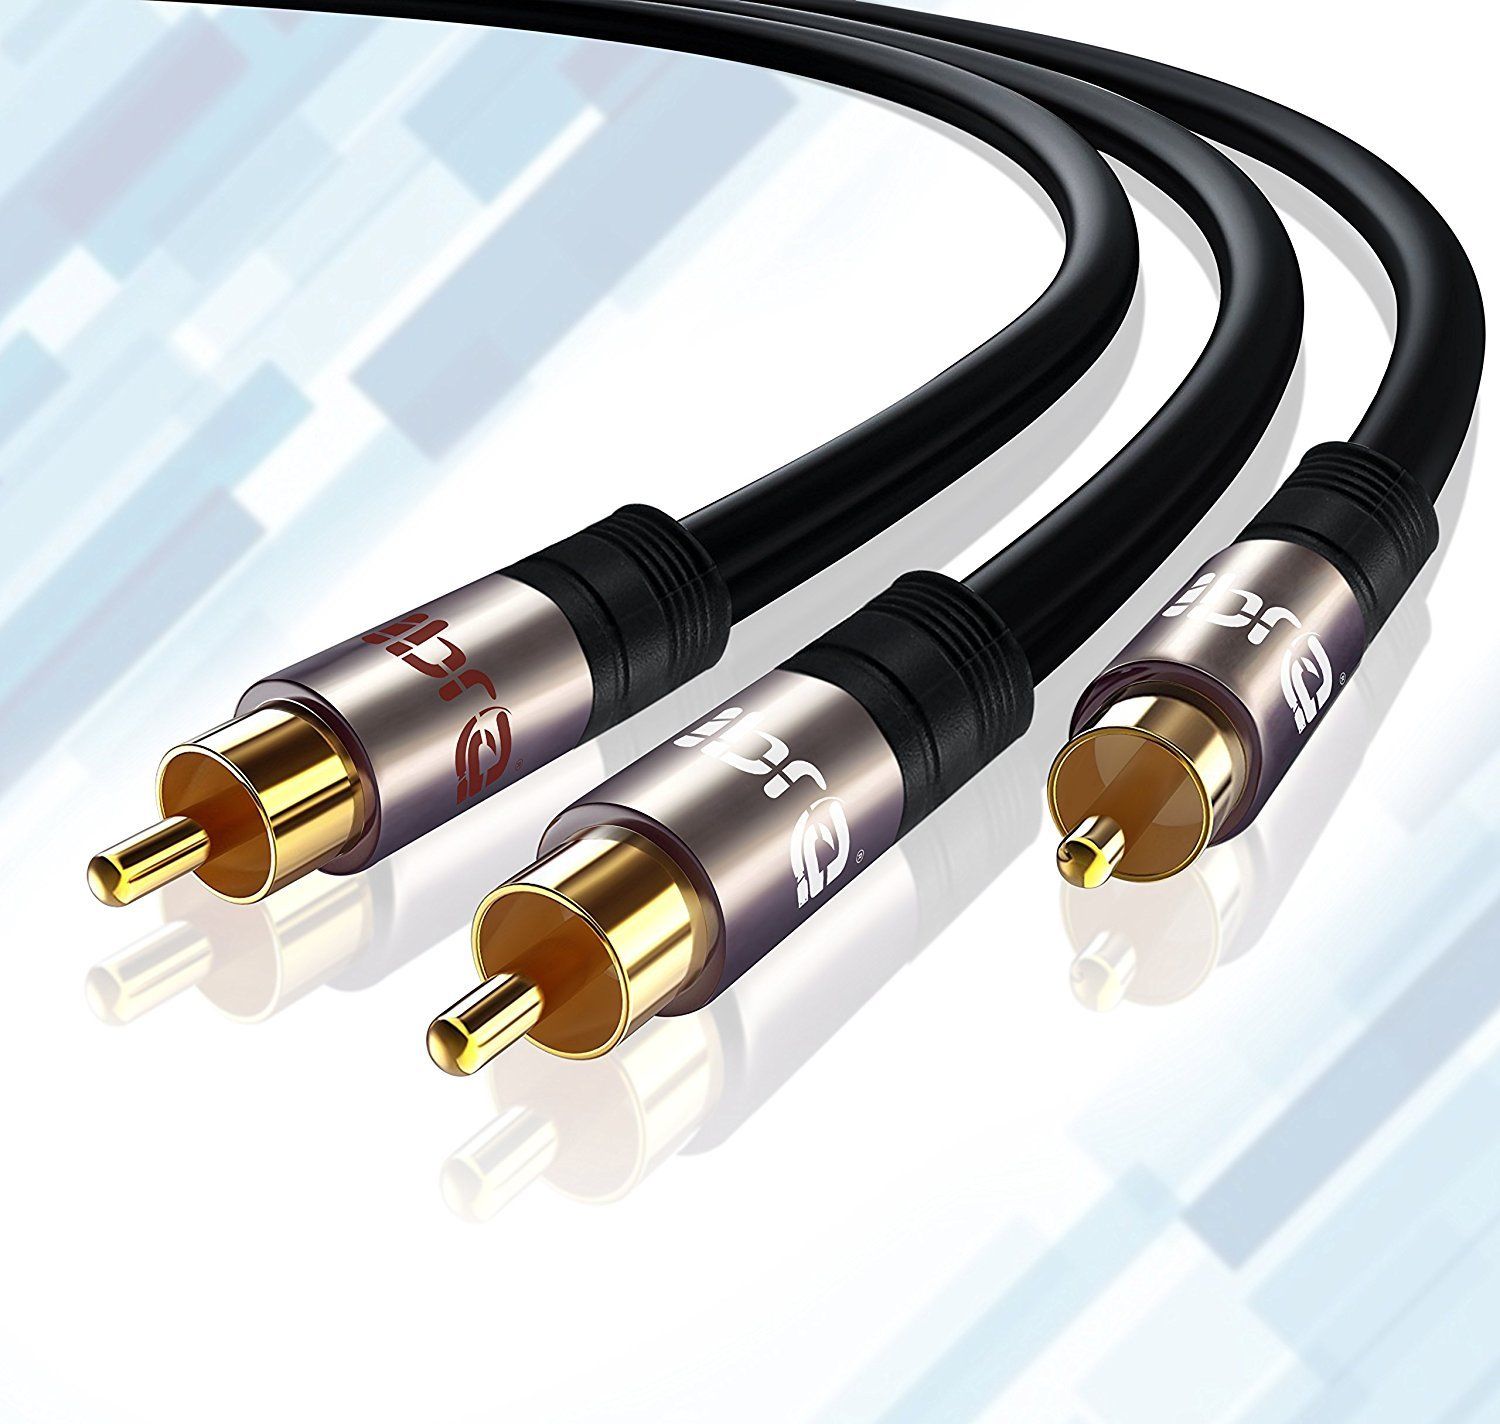 IBRA 7.5M Y Cable / Subwoofer Cable / Audio Cable / RCA Cable (1 x RCA to 2 x RCA) - GUN Metal Range